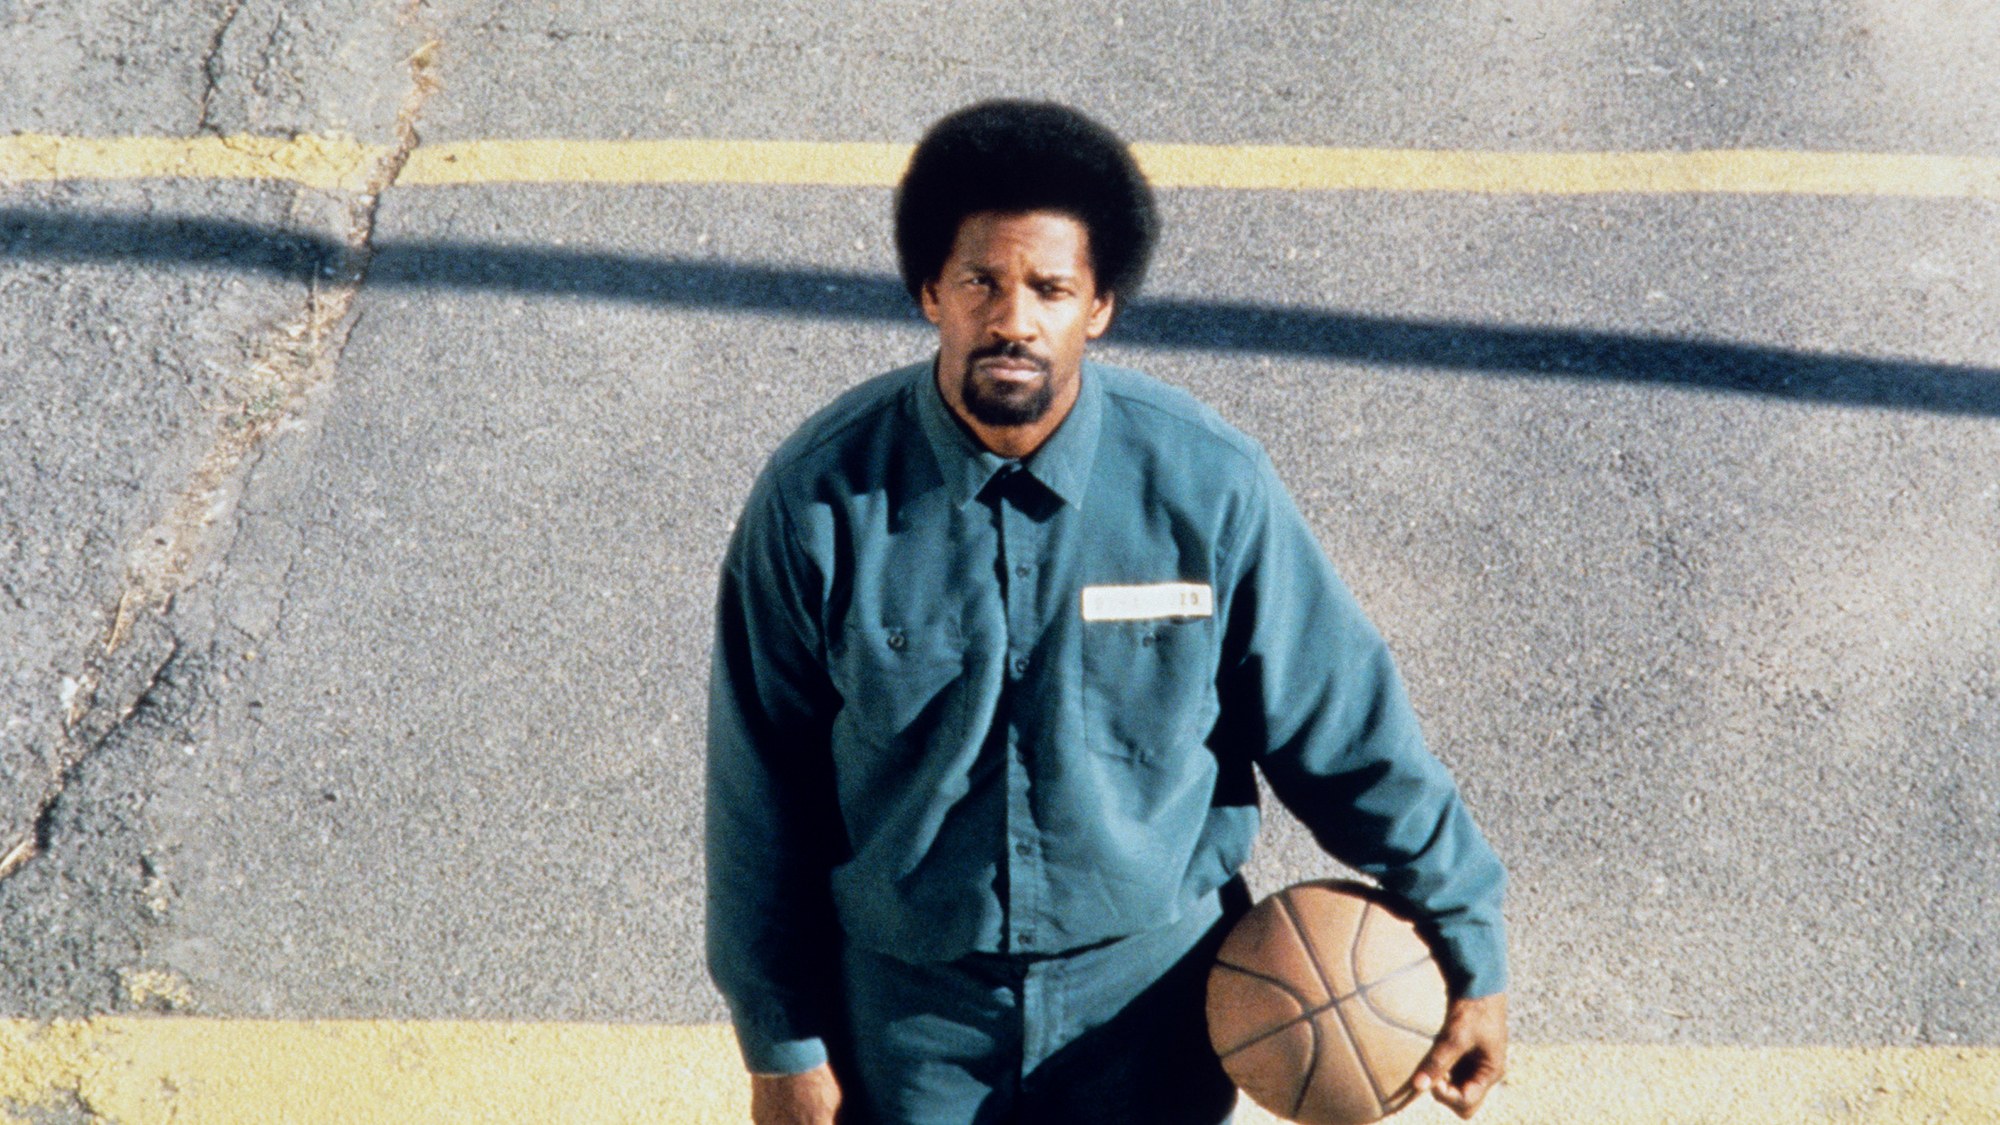 Some of the Best Basketball movies | Live for Films2000 x 1125